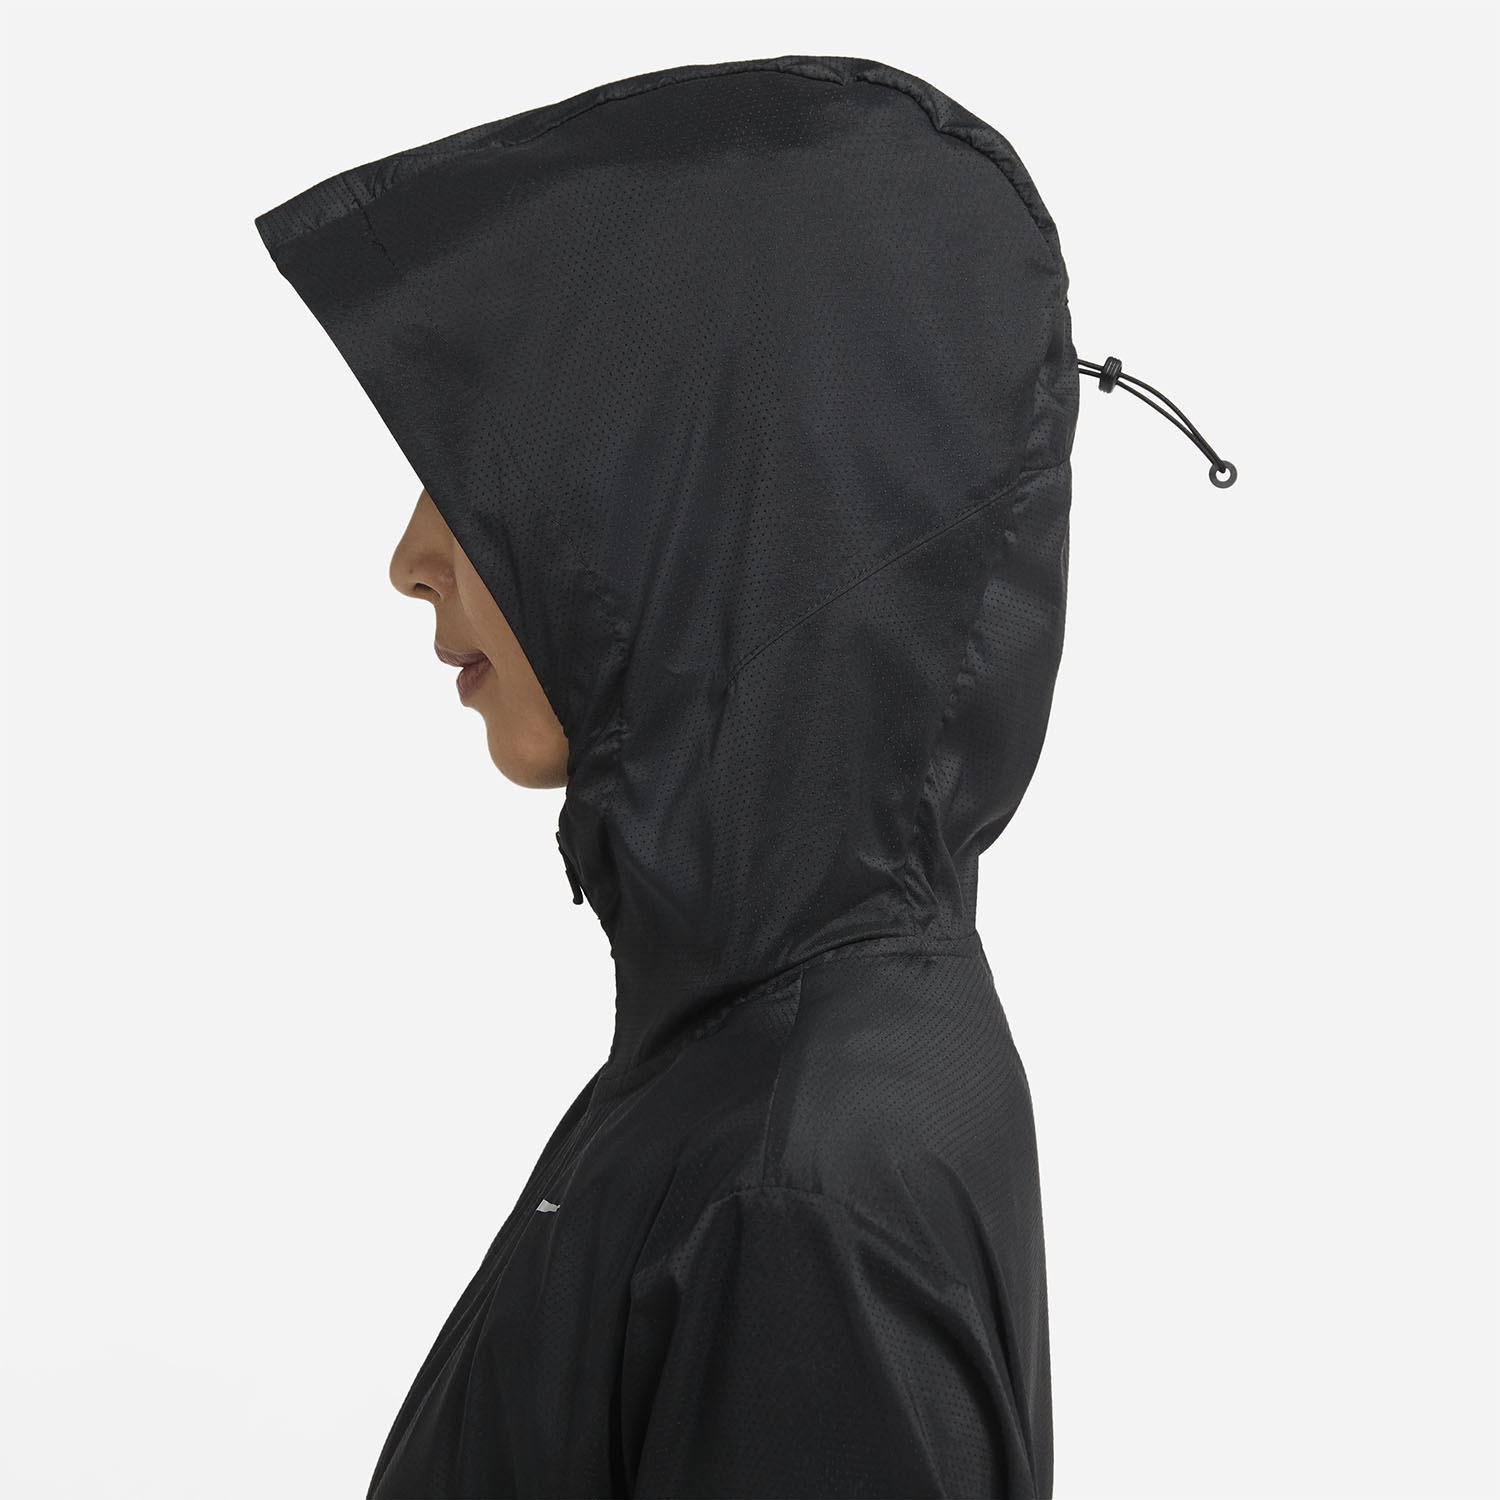 Nike Impossibly Light Chaqueta - Black/Reflective Silver